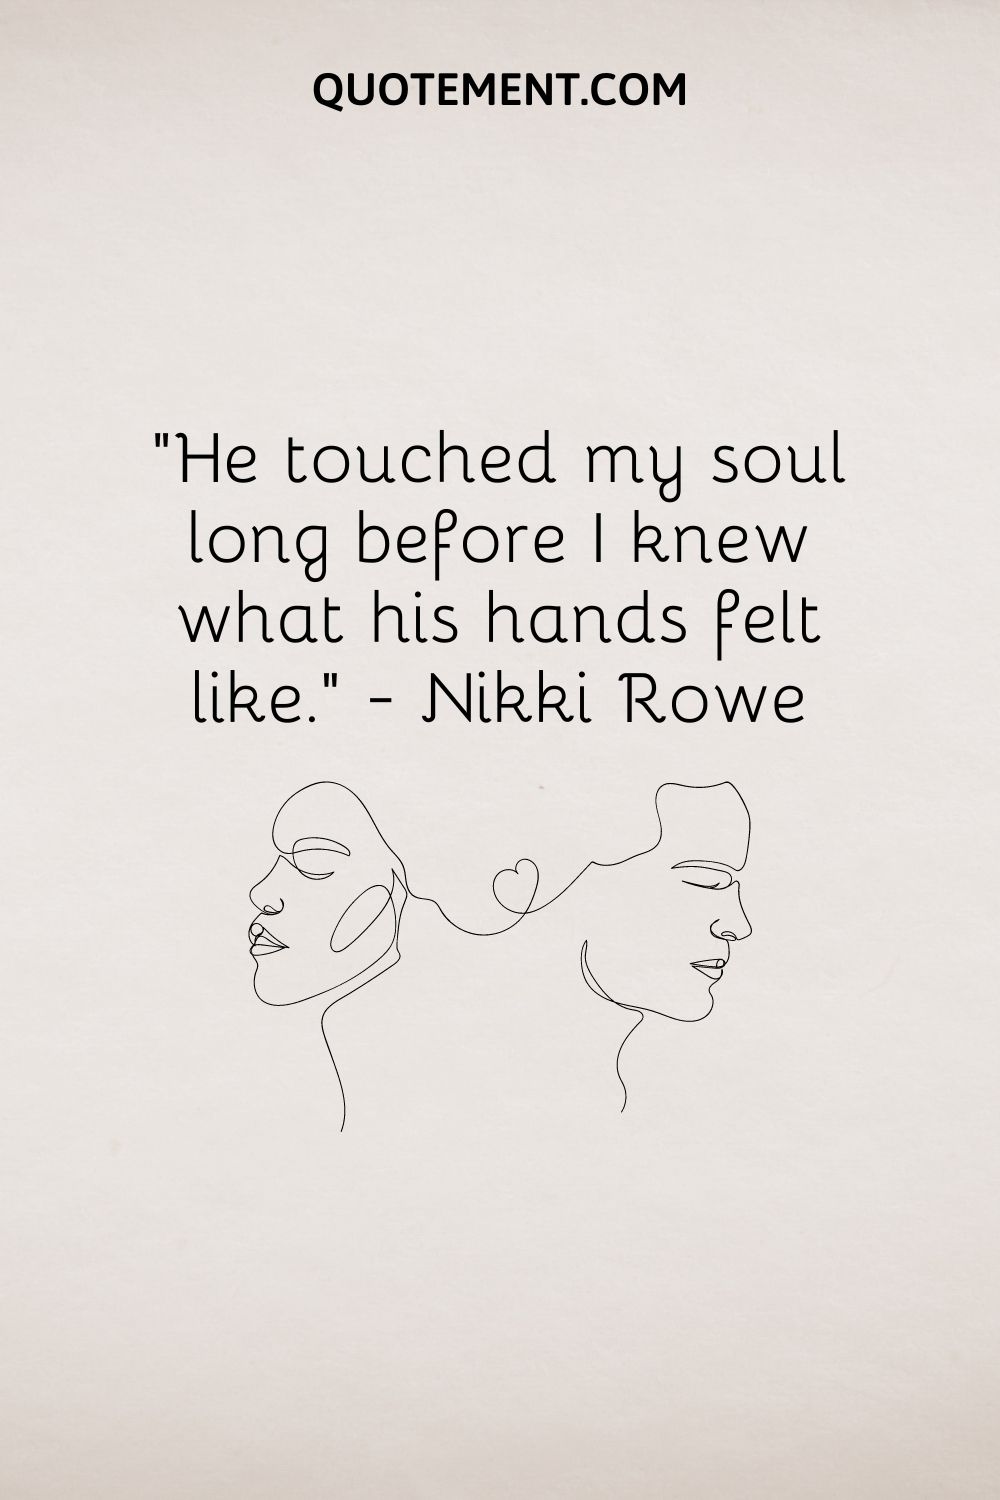 He touched my soul long before I knew what his hands felt like